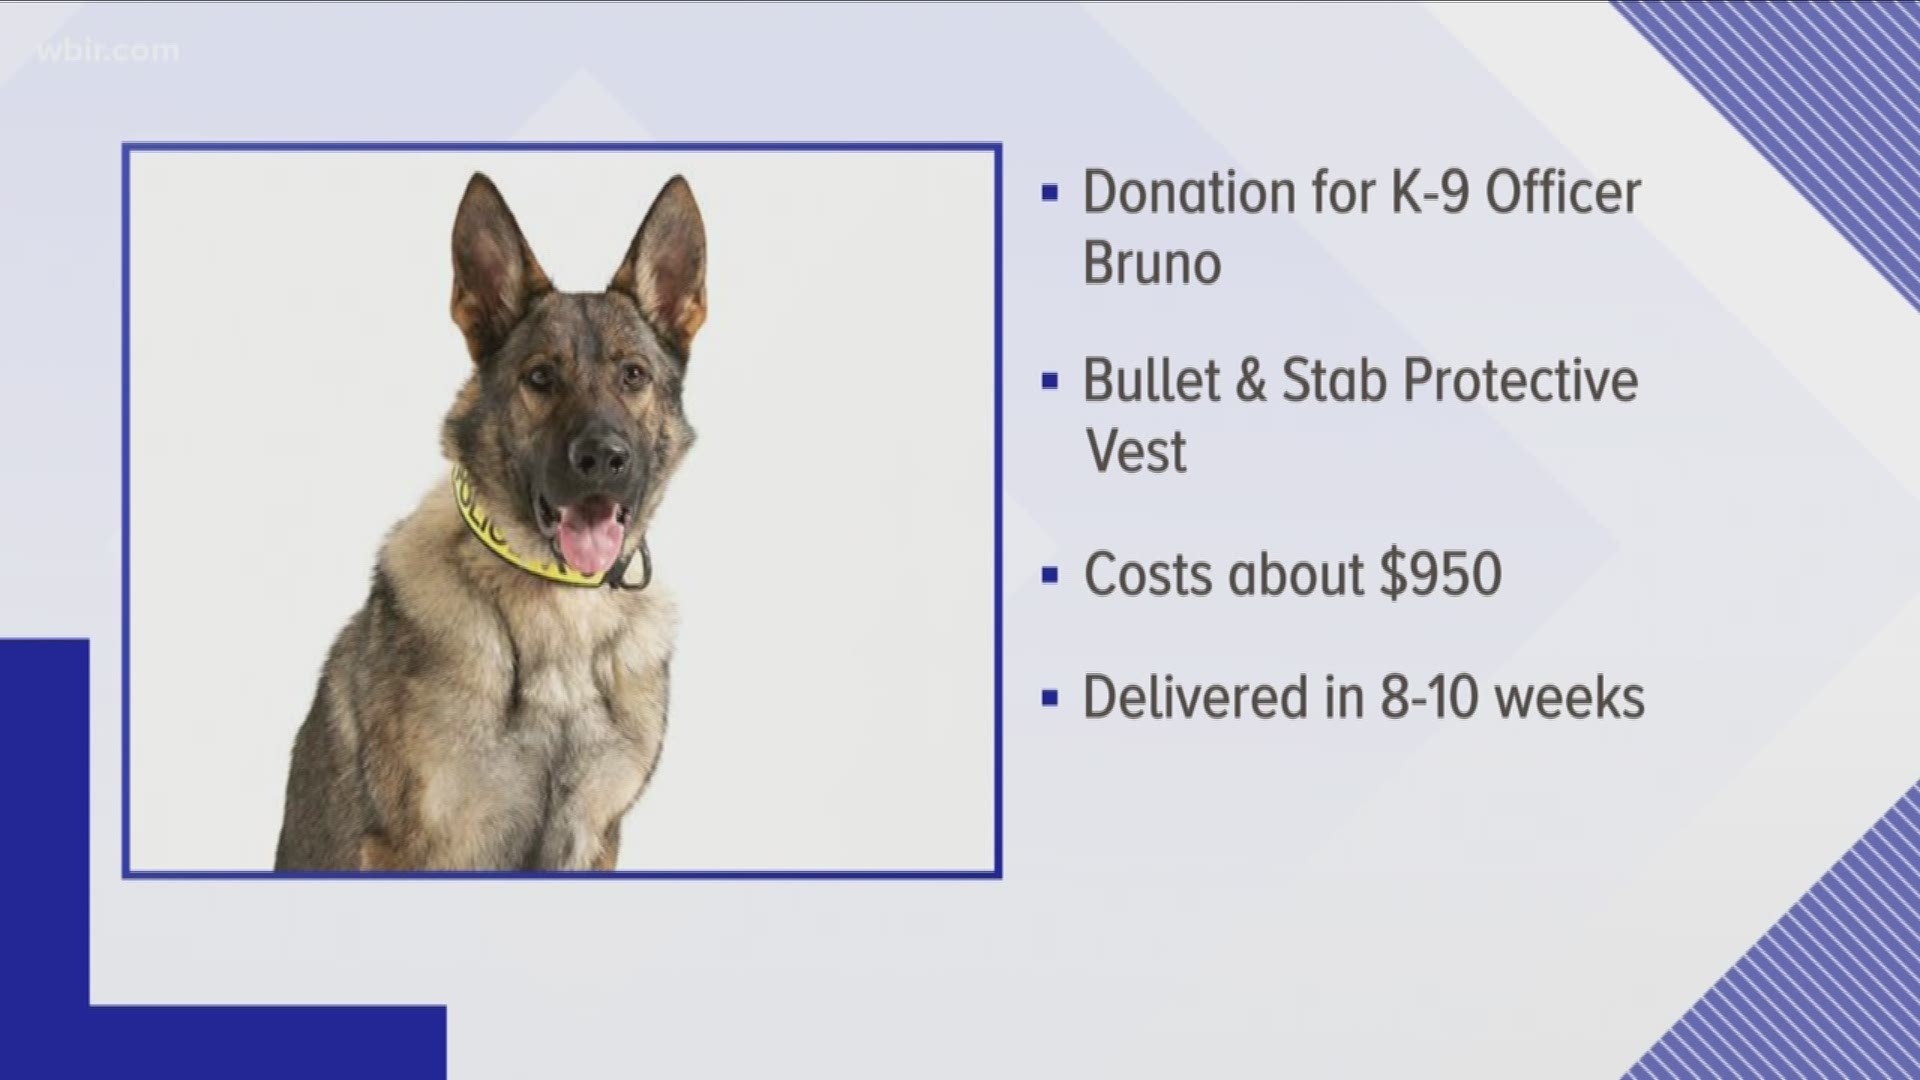 Bruno will soon have some much-needed protection thanks to a donation from a Michigan couple.